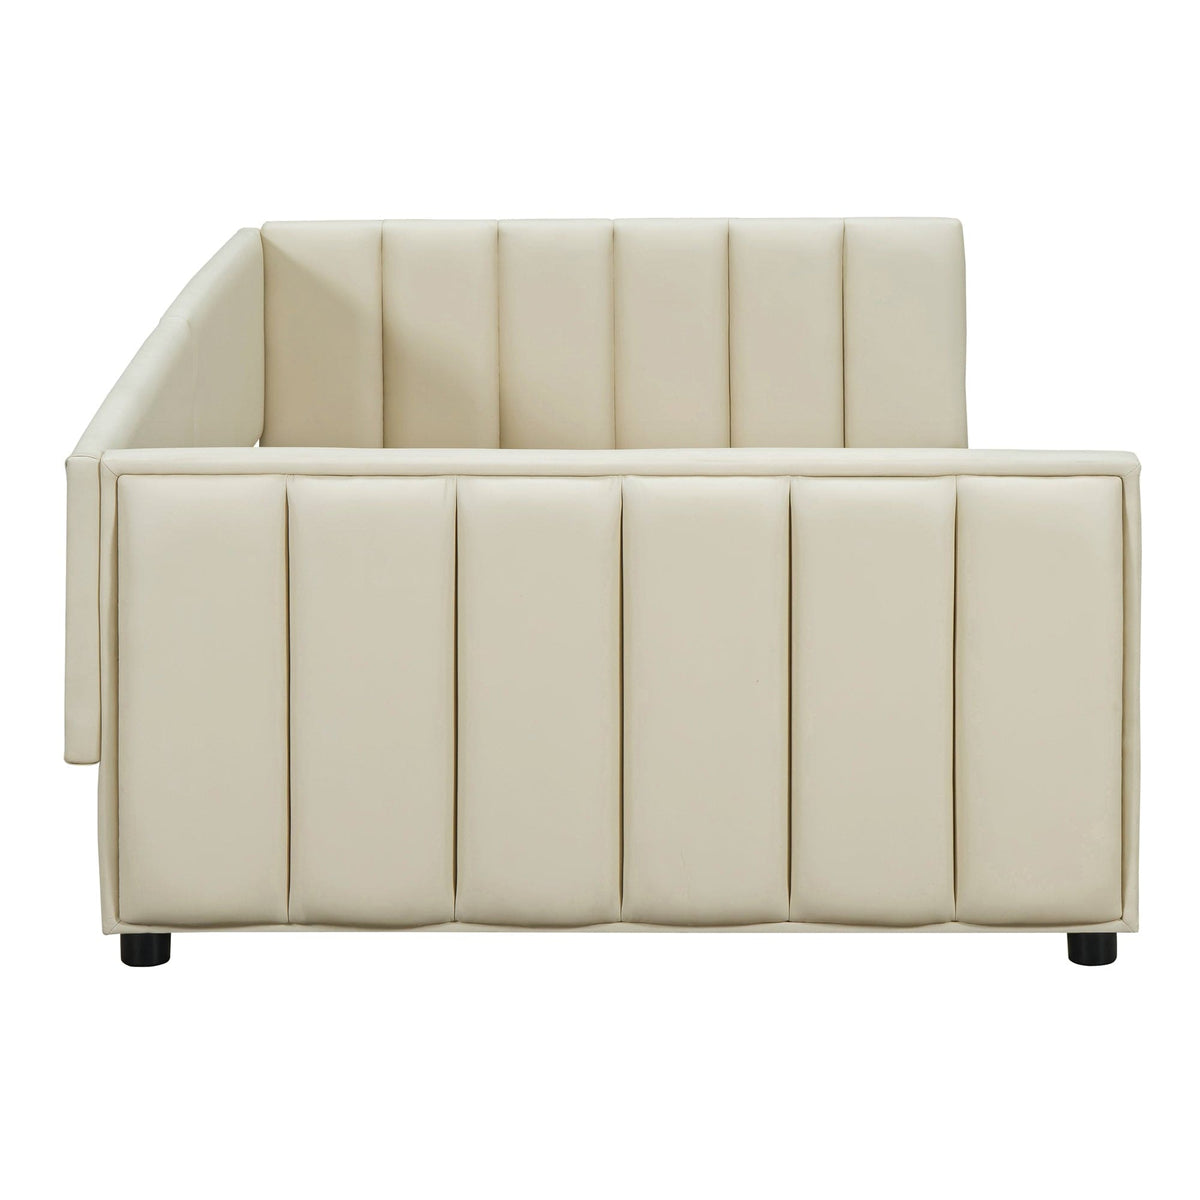 Acme Queen Size & Twin XL Size Upholstered Platform Bed, Mother & Child Bed, PU Leather, Beige Mattress-Xperts-Florida